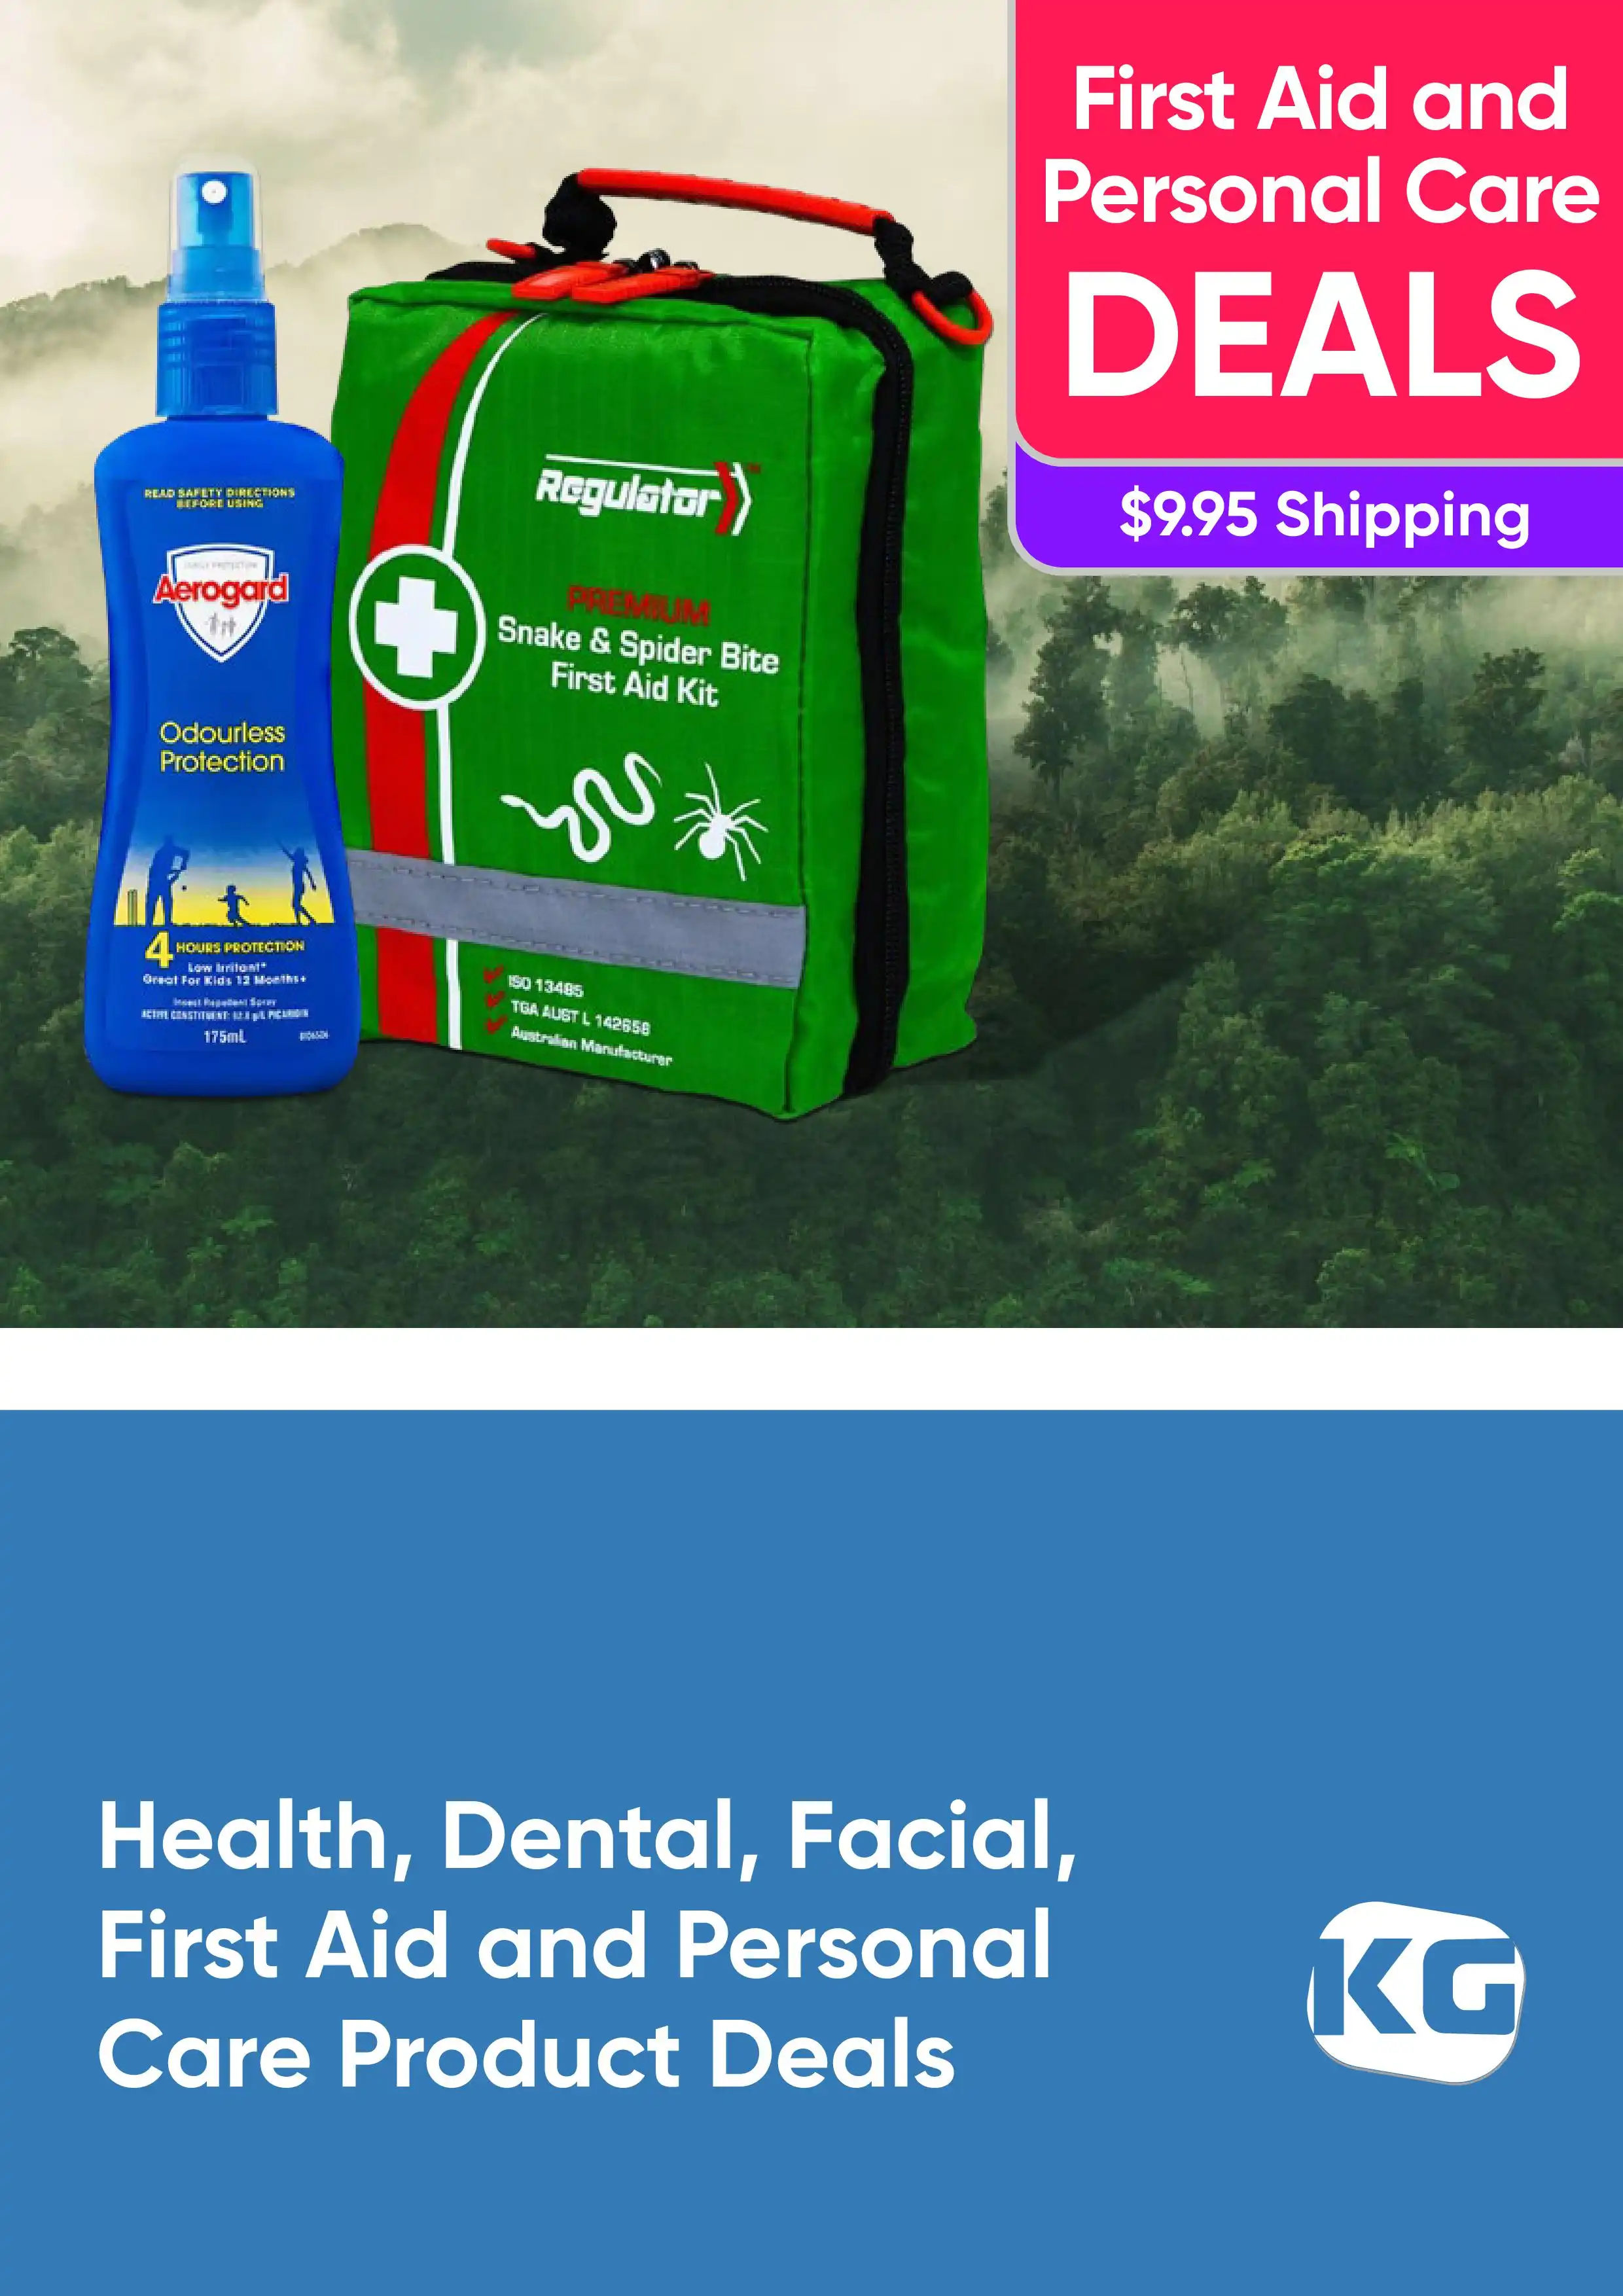 Health, Dental, Facial, First Aid and Personal Care Product Deals